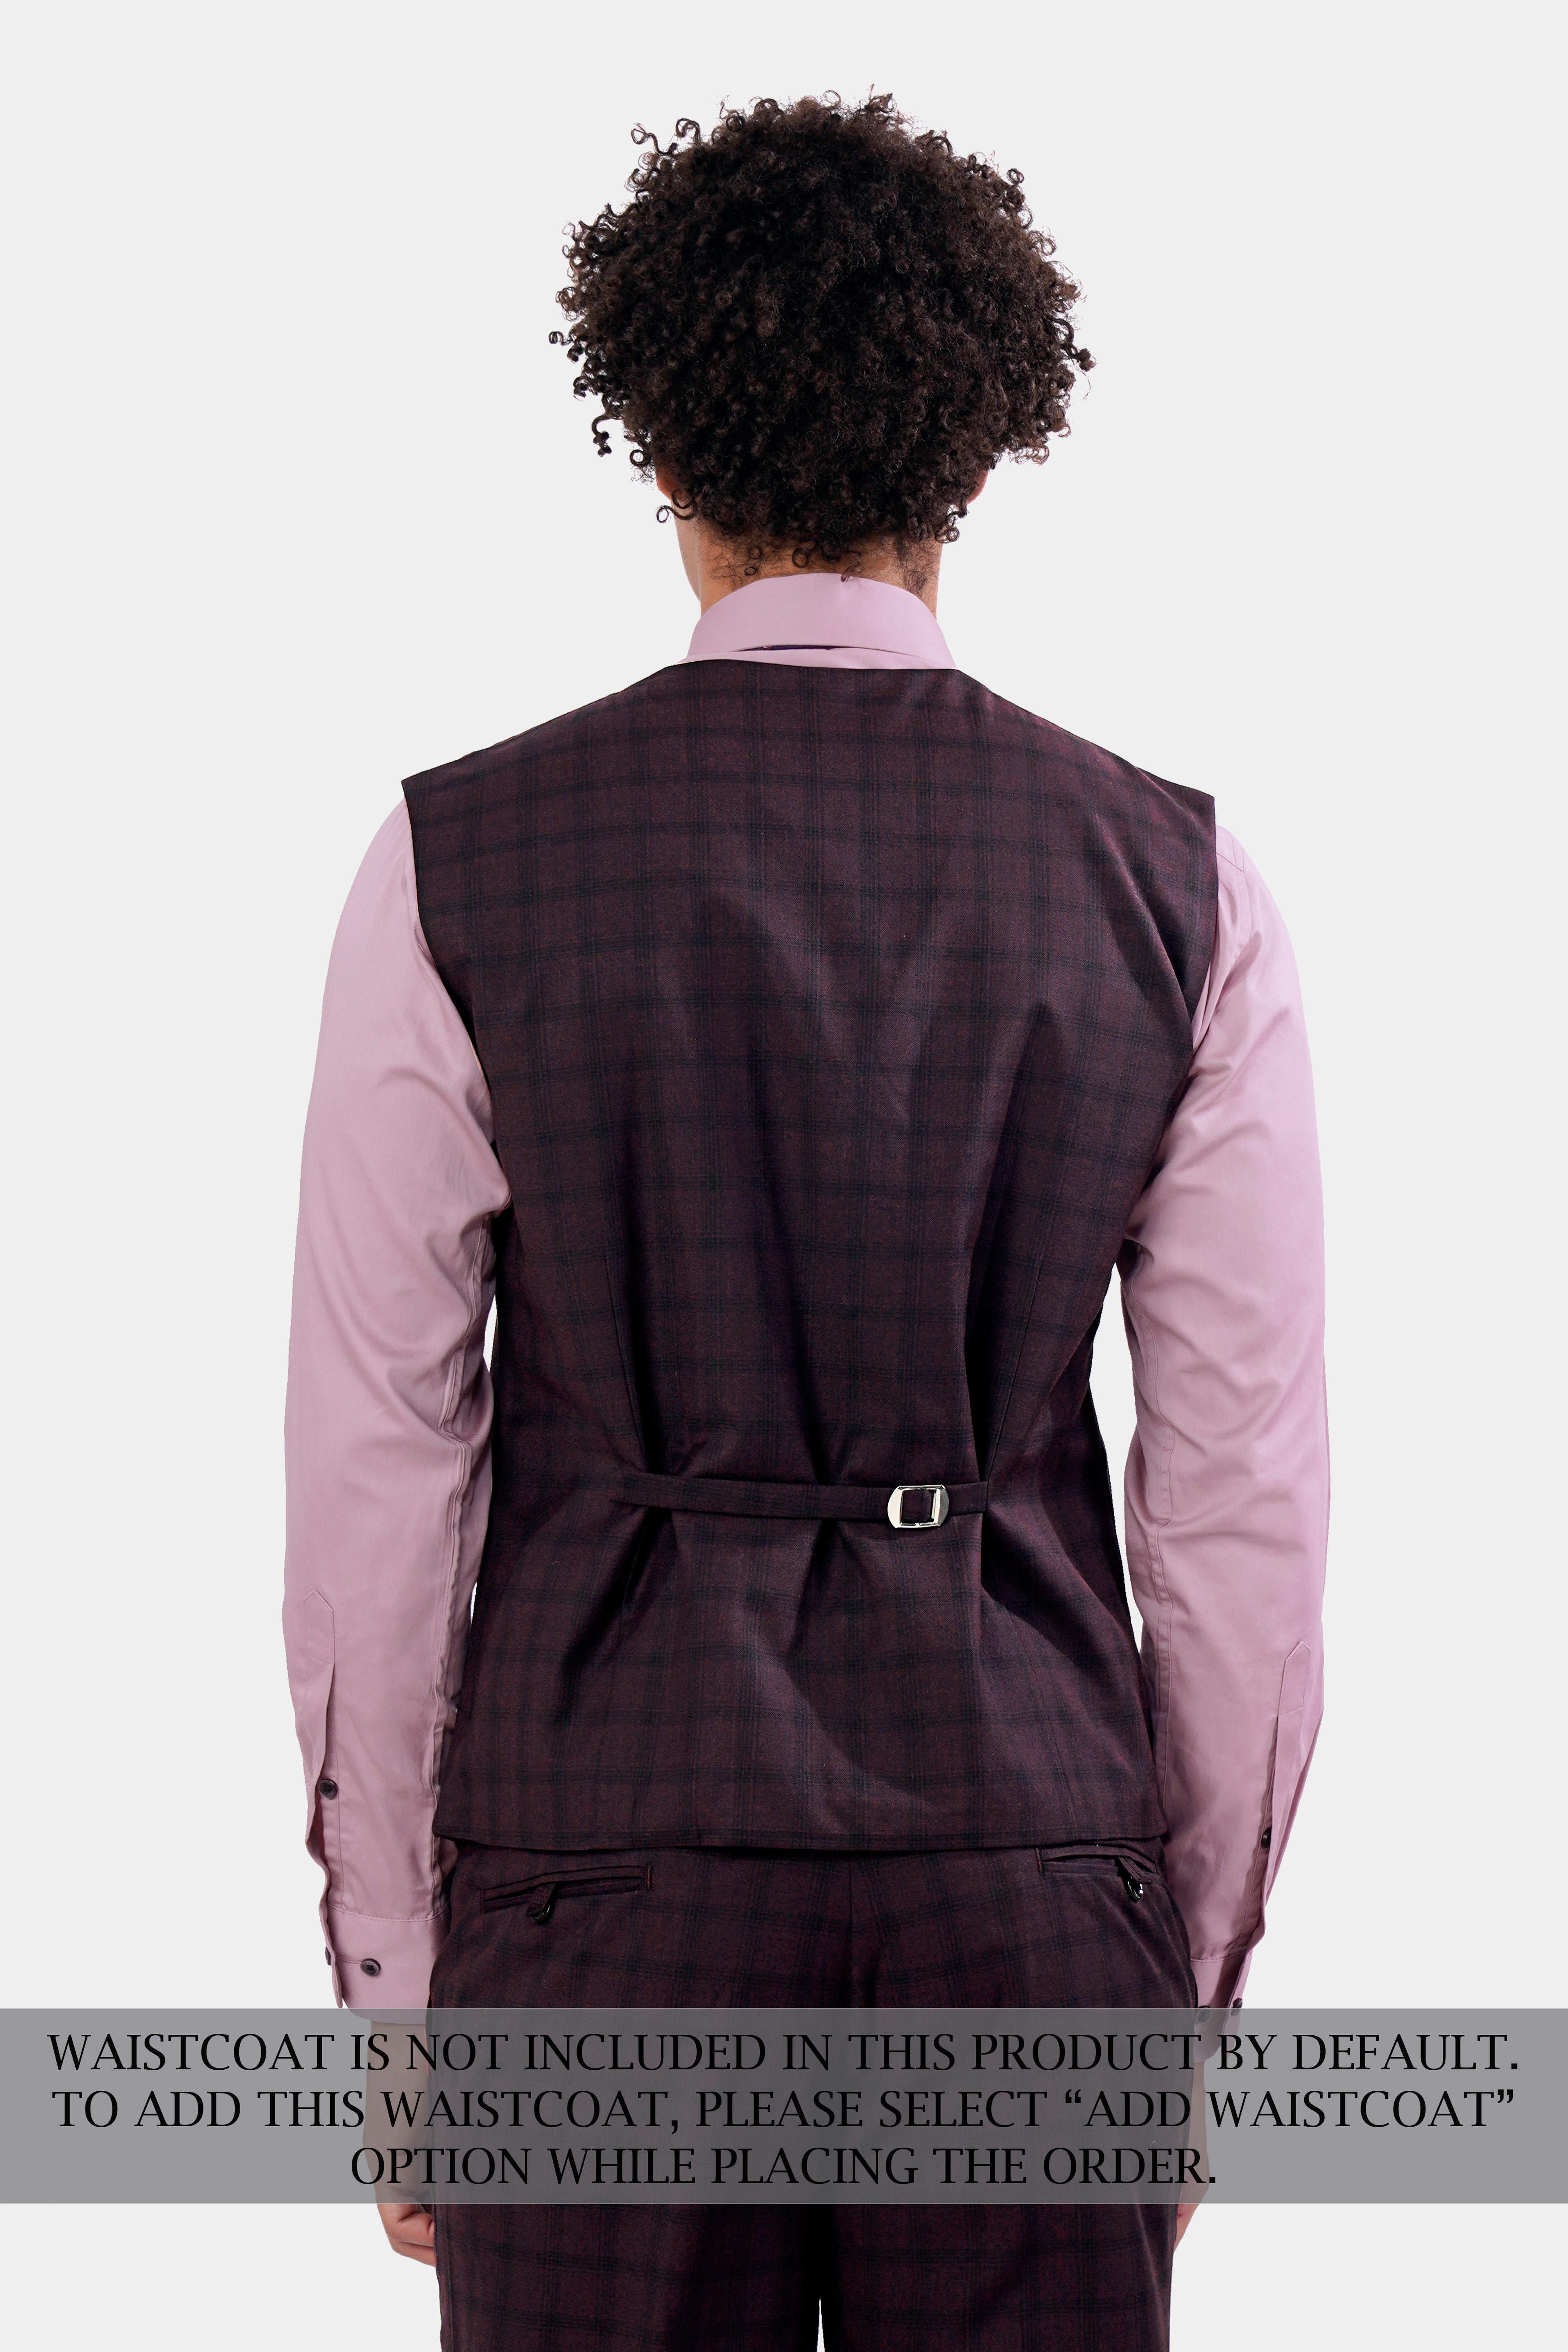 Cinder Purple Checkered Double Breasted Wool Rich Suit ST2916-DB-36, ST2916-DB-38, ST2916-DB-40, ST2916-DB-42, ST2916-DB-44, ST2916-DB-46, ST2916-DB-48, ST2916-DB-50, ST2916-DB-52, ST2916-DB-54, ST2916-DB-56, ST2916-DB-58, ST2916-DB-60